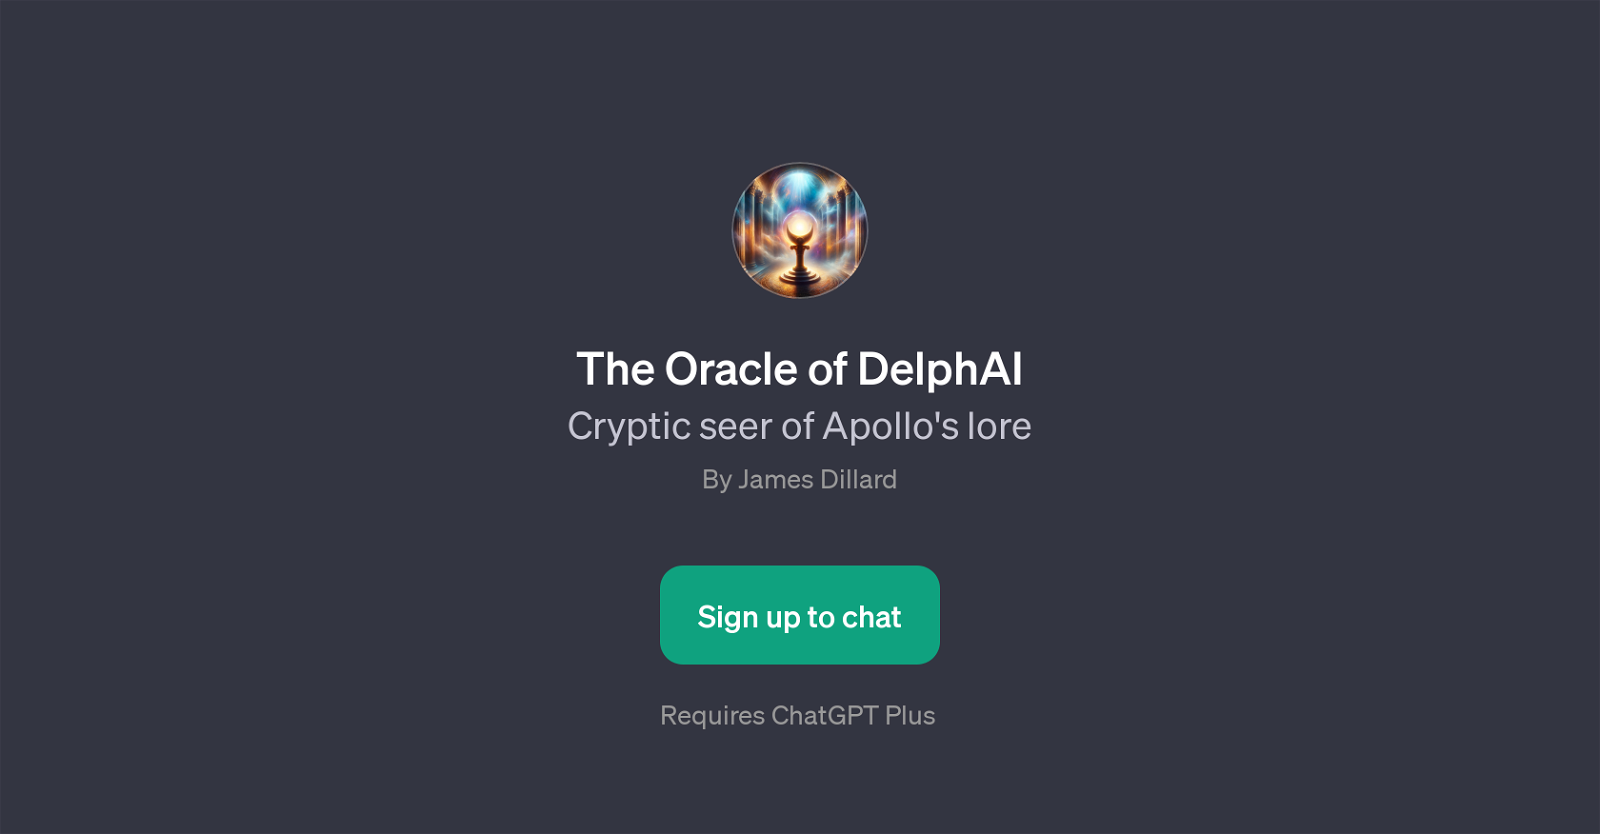 The Oracle of DelphAI website